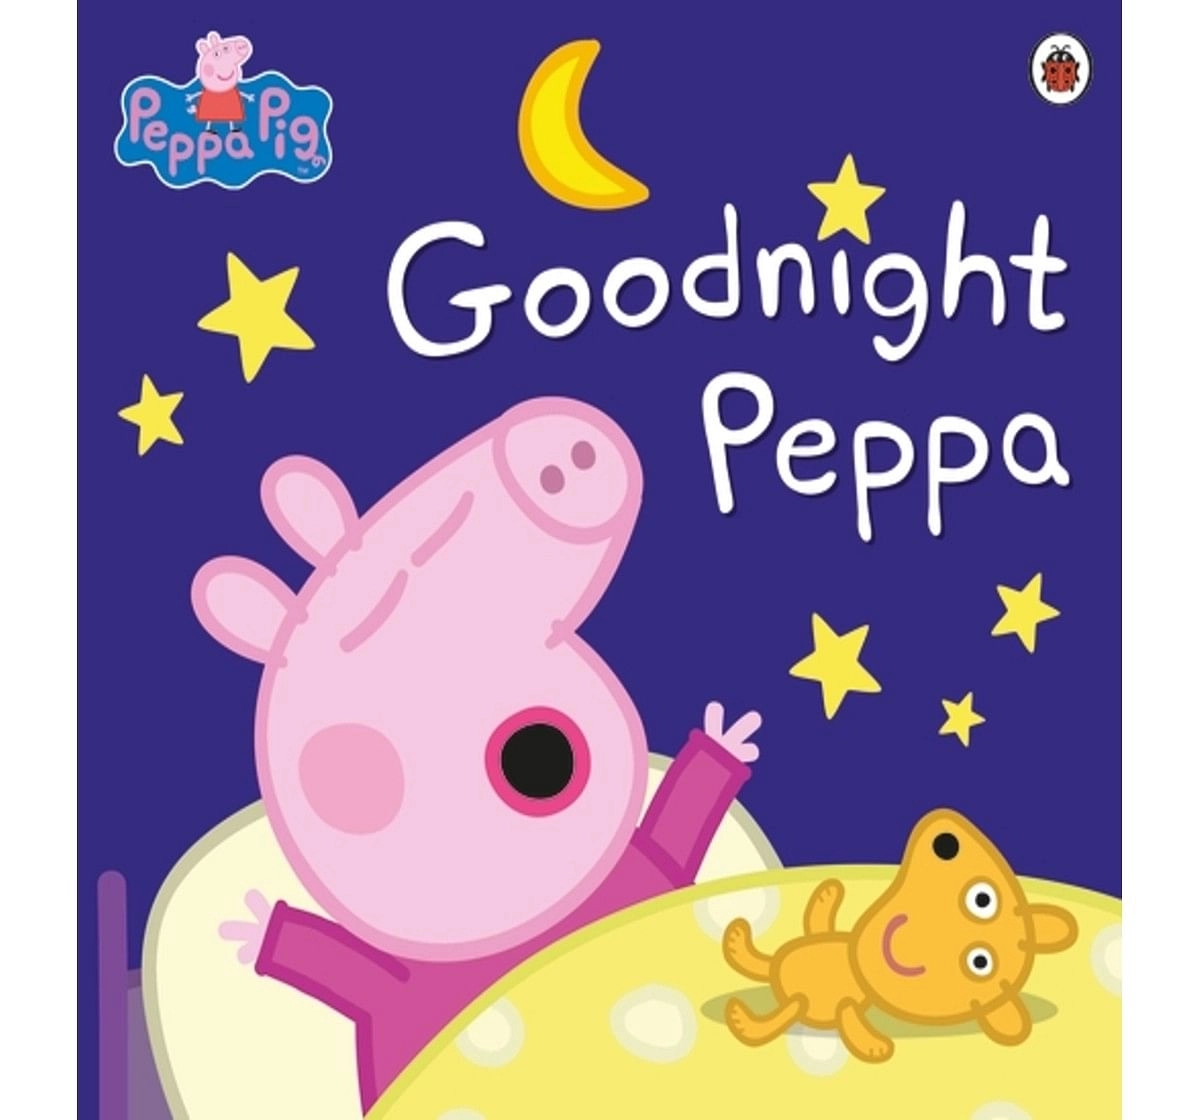 Peppa Pig : Goodnight Peppa, 32 Pages Book by Ladybird, Paperback